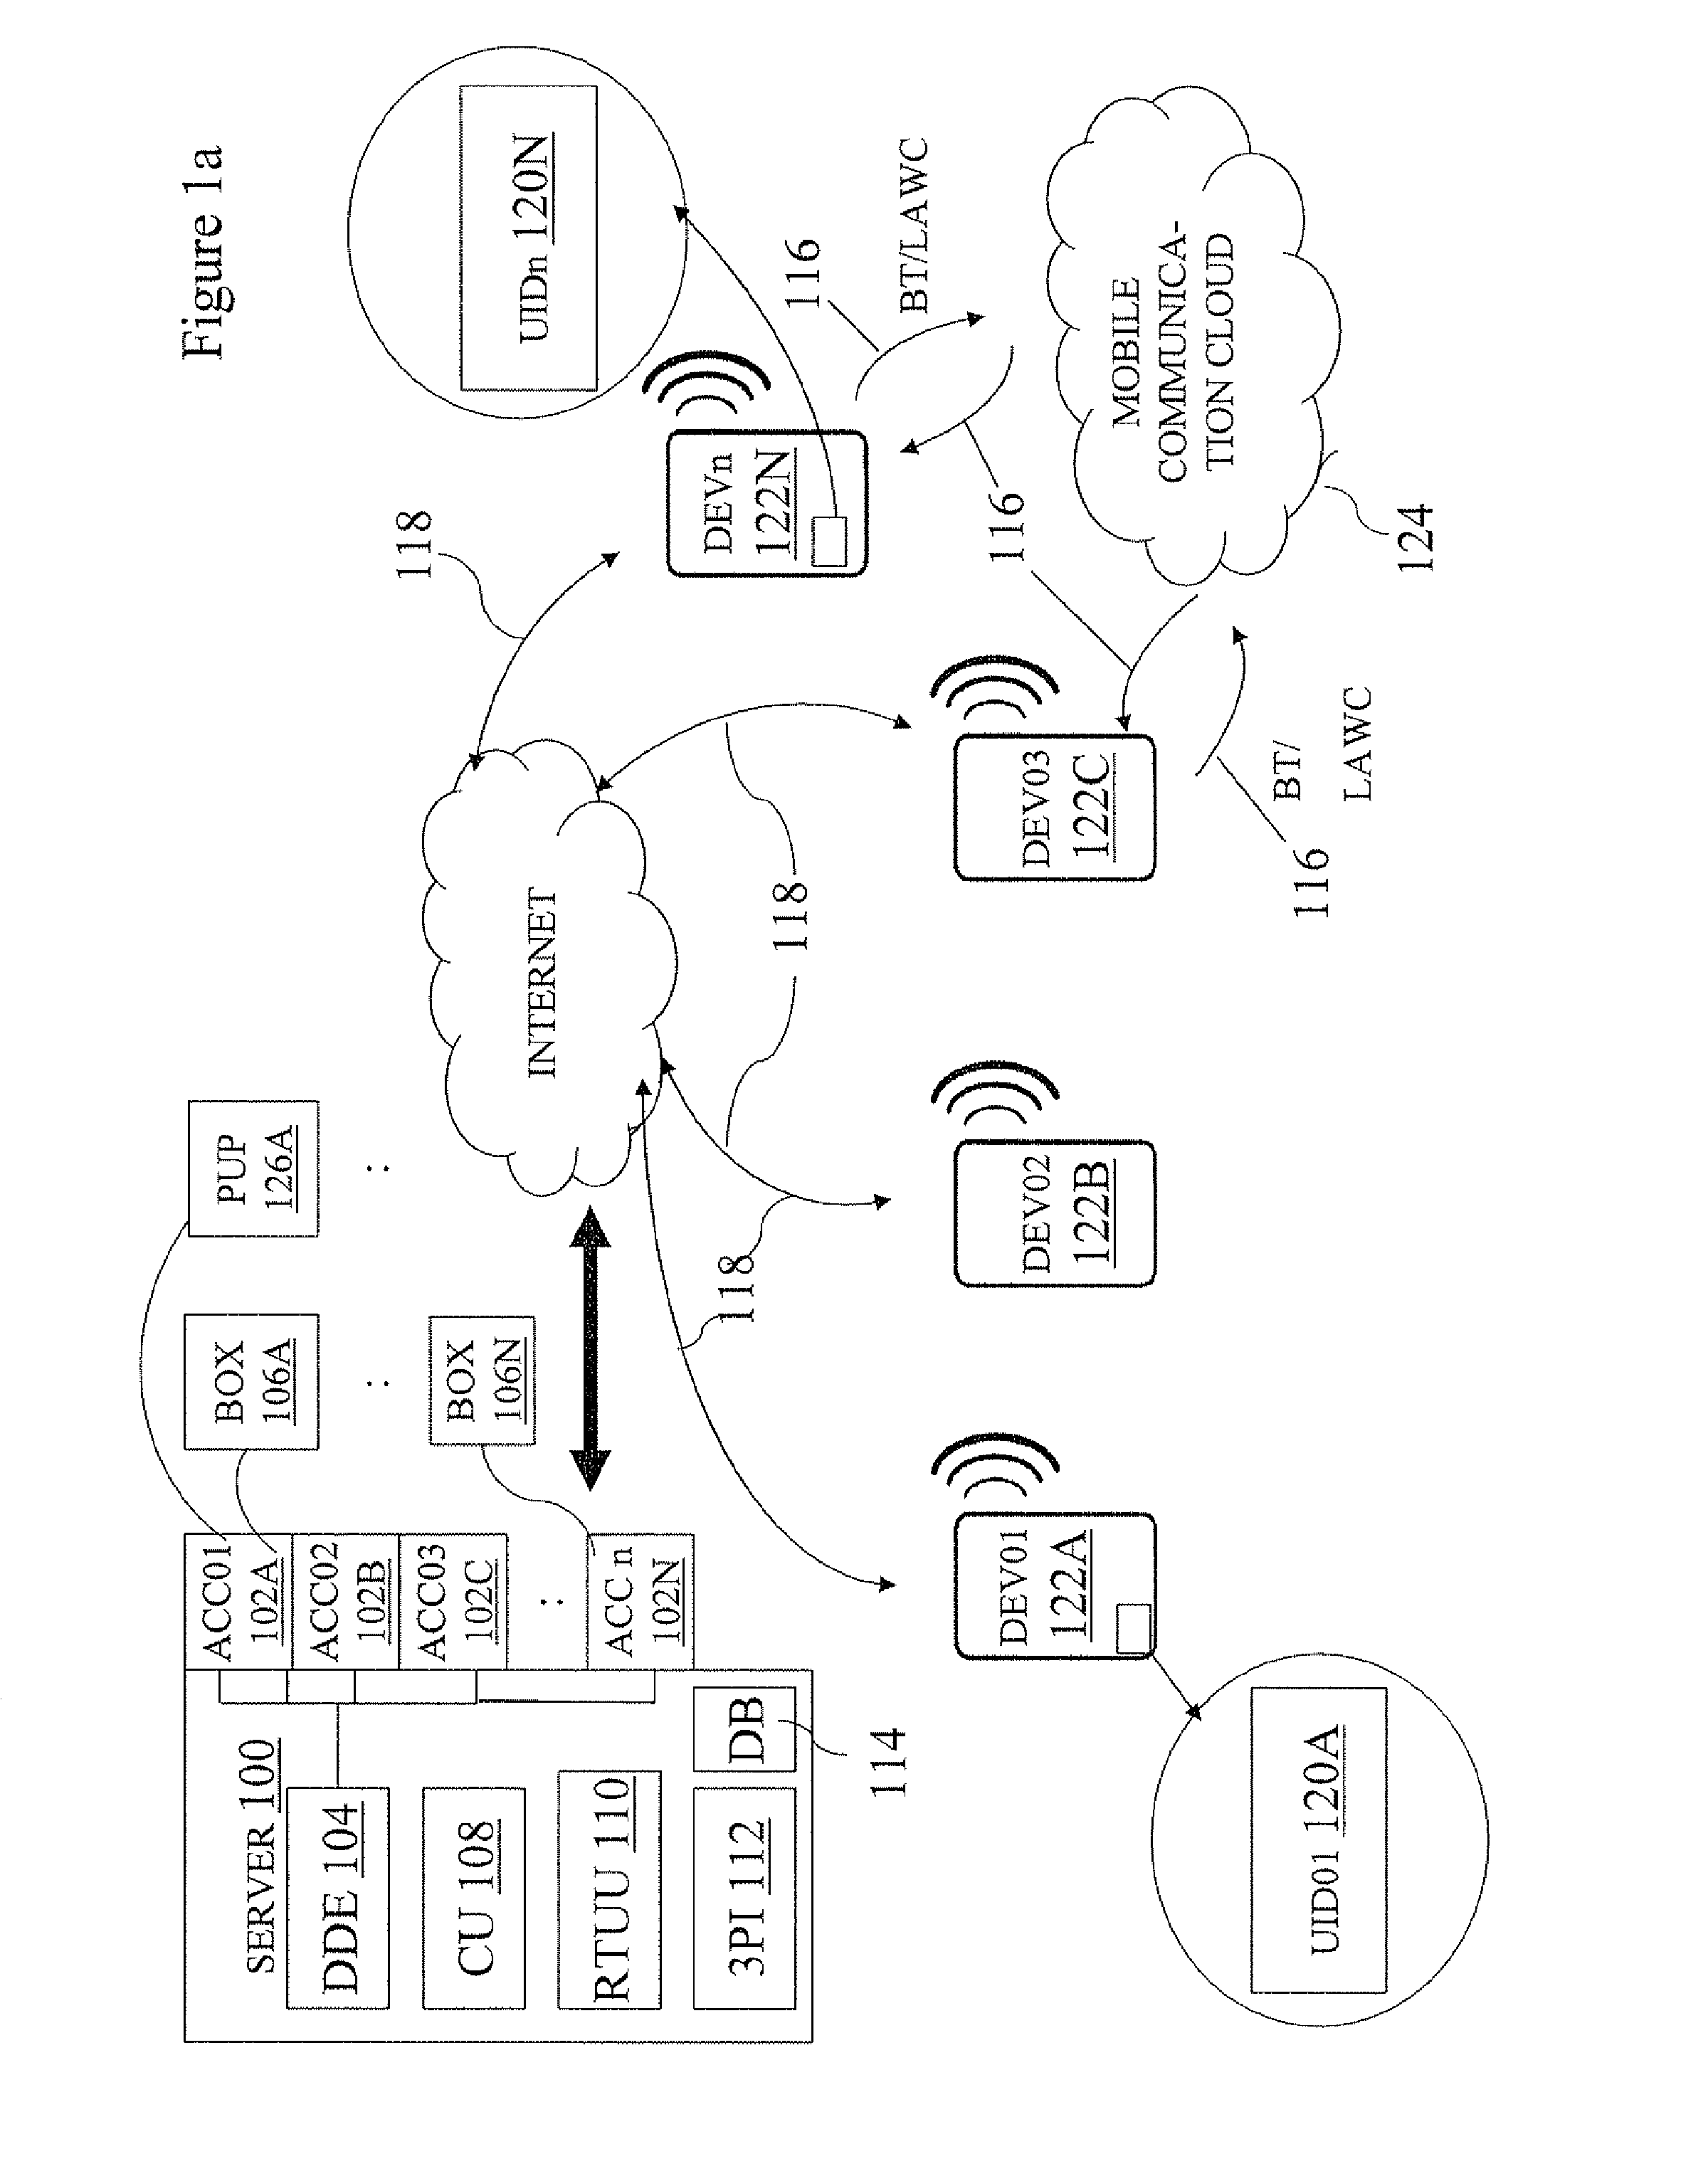 Location-aware Mobile Connectivity and Information Exchange System